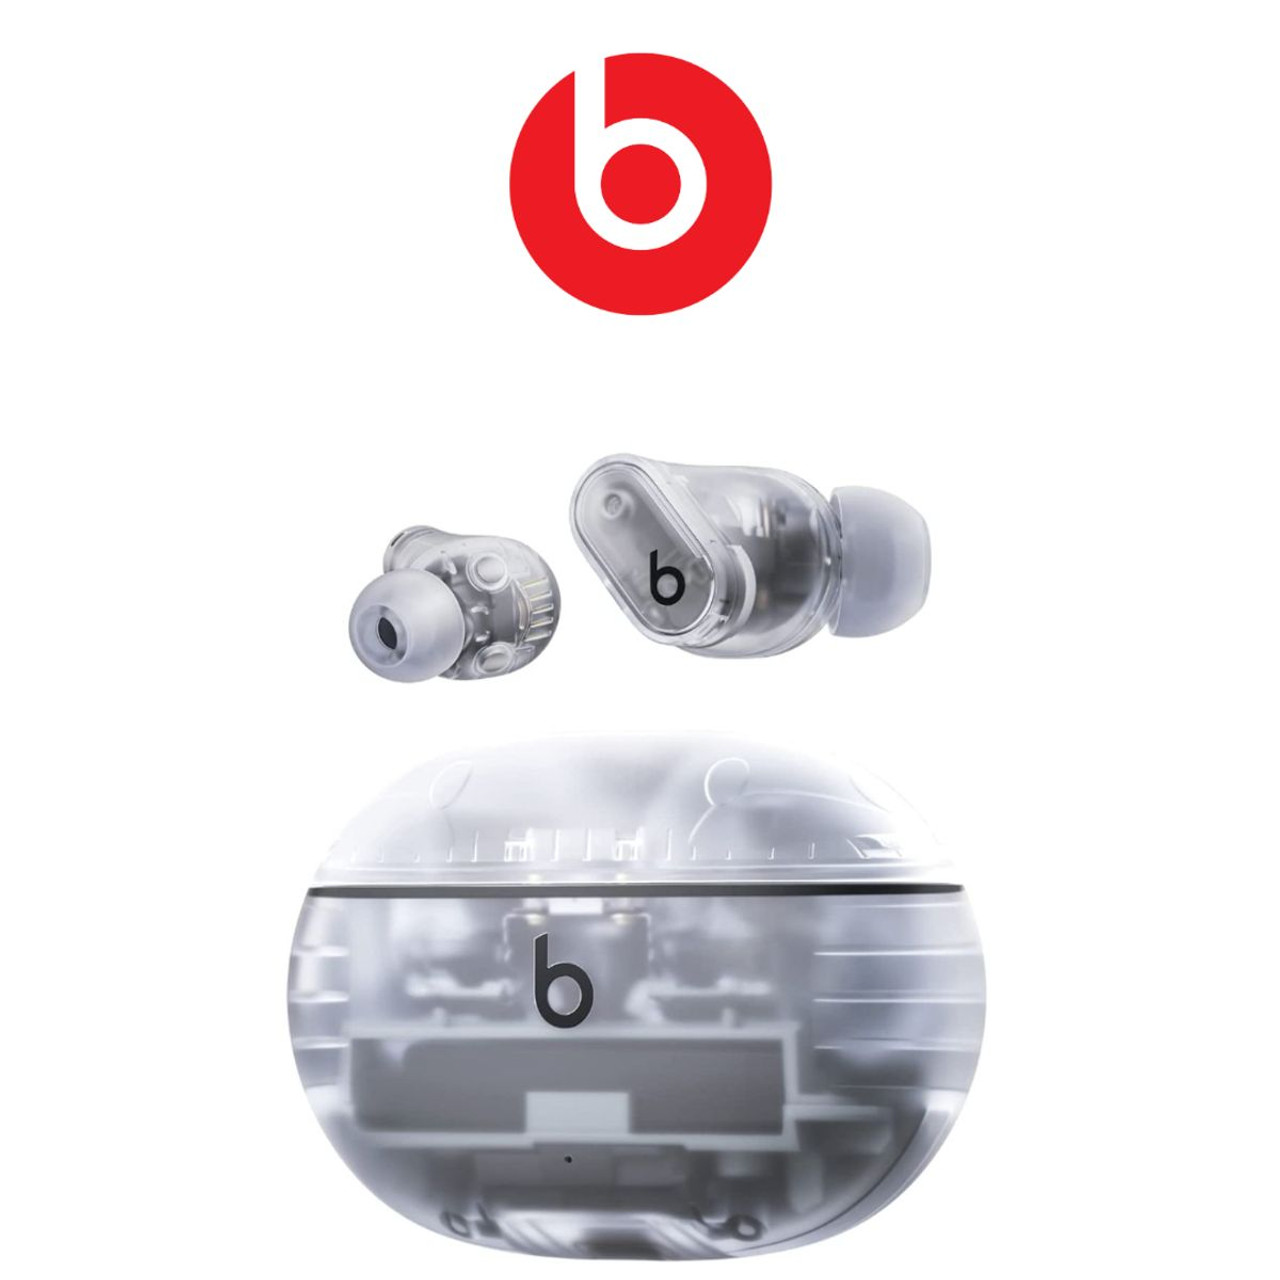 Beats Studio Buds Wireless, Noise-Cancelling Earbuds product image